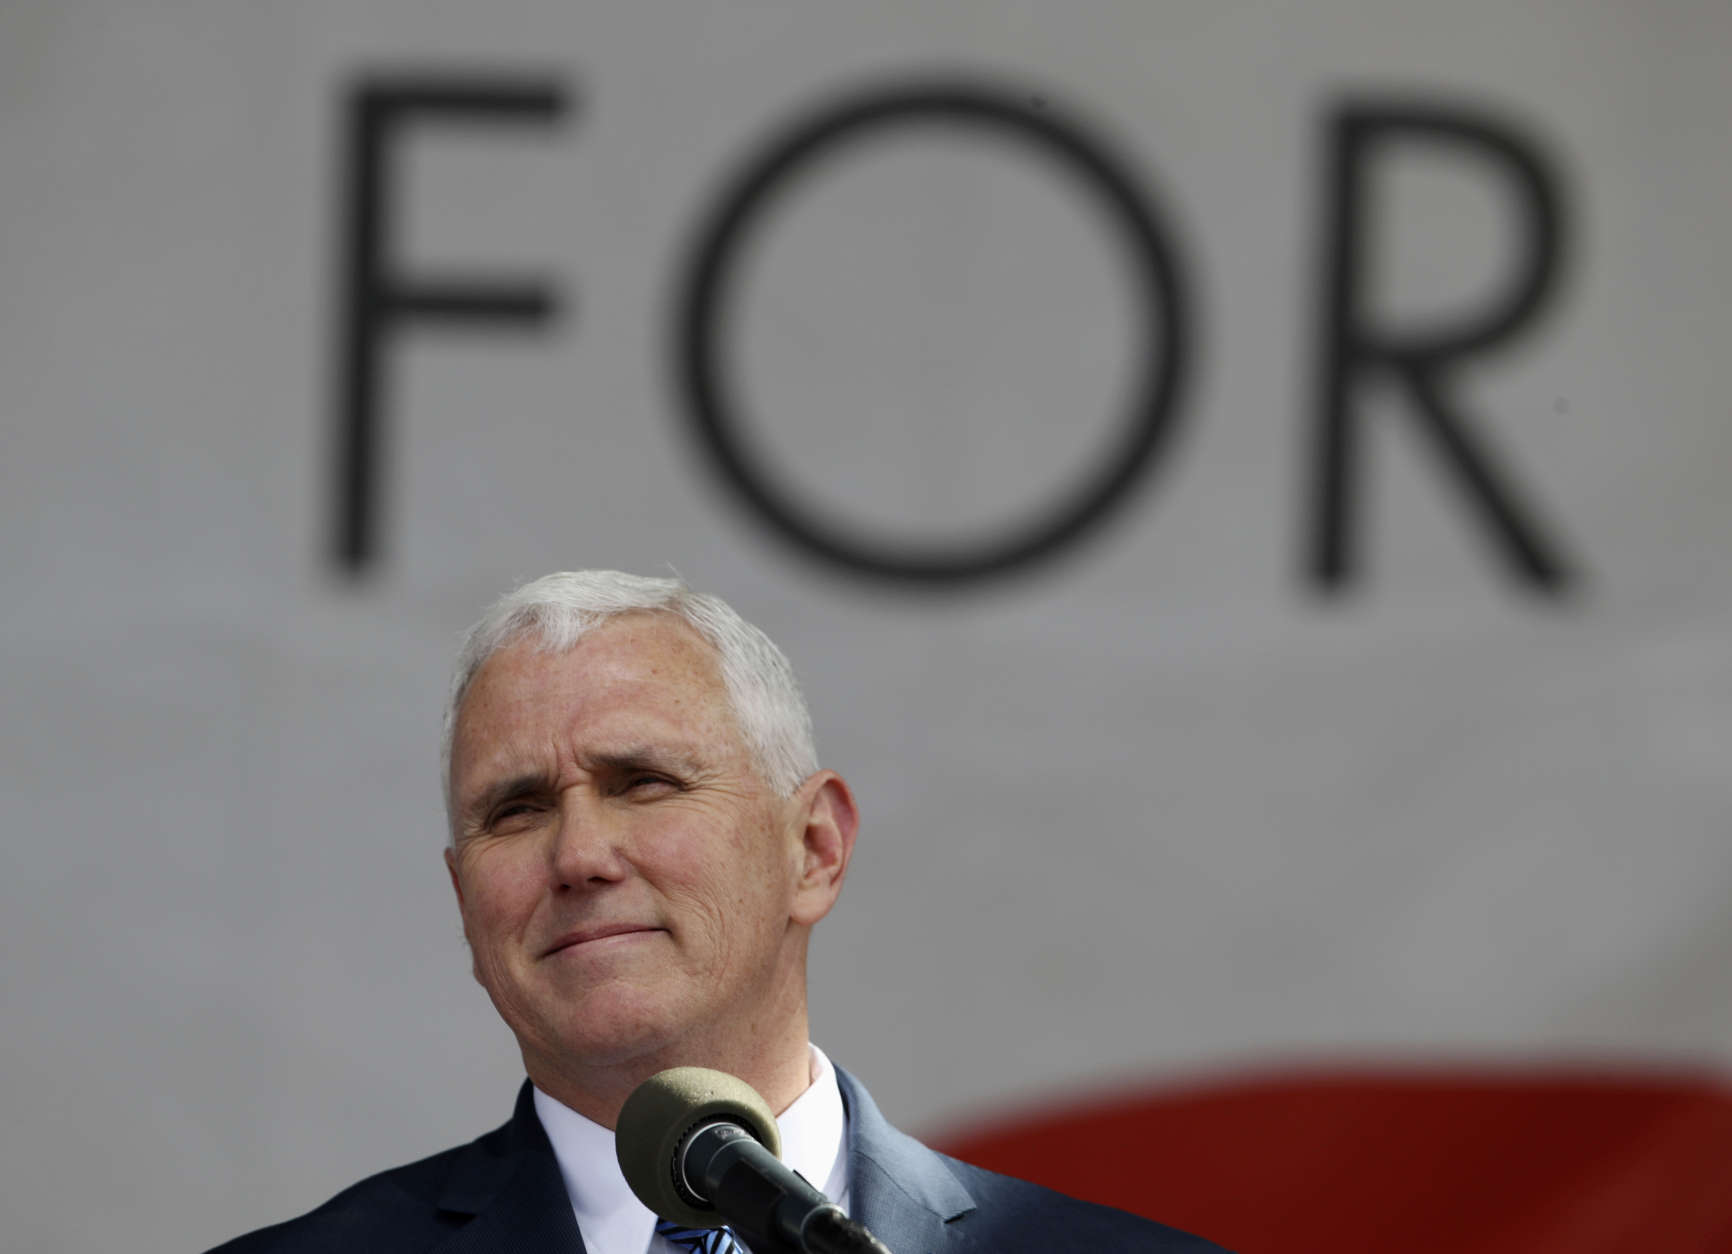 Vice President Mike Pence pauses while speaking at the March for Life on the National Mall in Washington, Friday, Jan. 27, 2017. (AP Photo/Manuel Balce Ceneta)